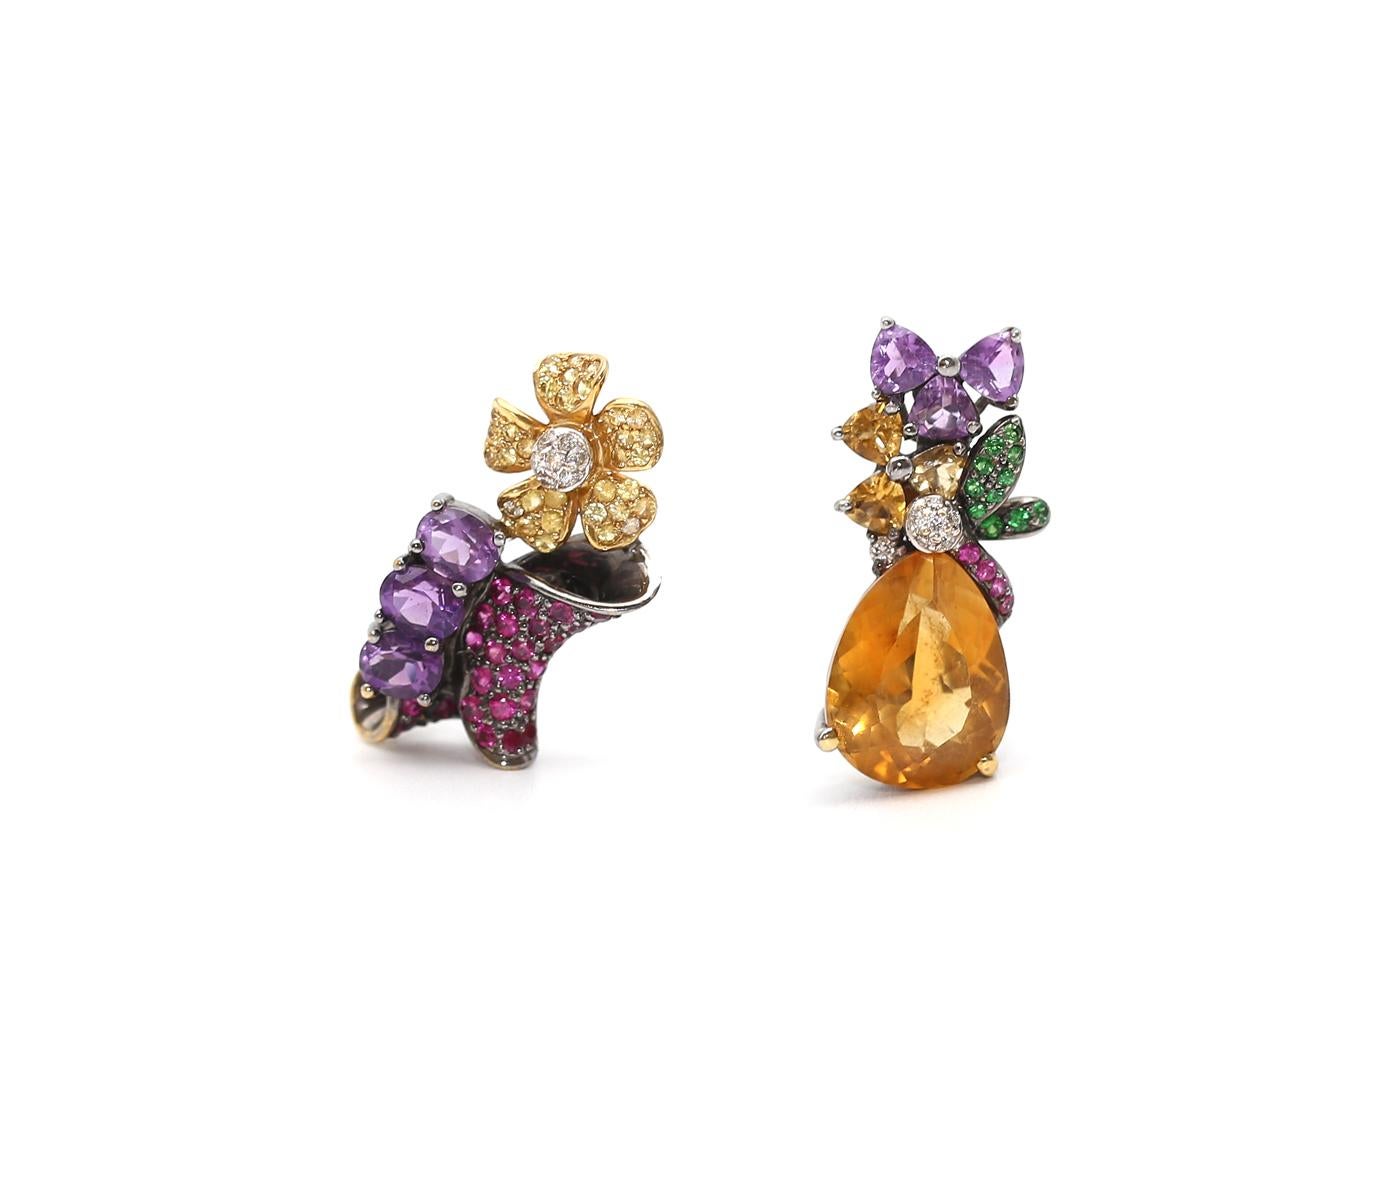 Citrine Amethysts Fancy Diamonds Black Gold Unmatched Earrings 18K.
Absolutely unique and really unusual pair of earrings. it does not match in form but you can see straight away that it is a perfect pair! Natural colorful, fruity items.
Created